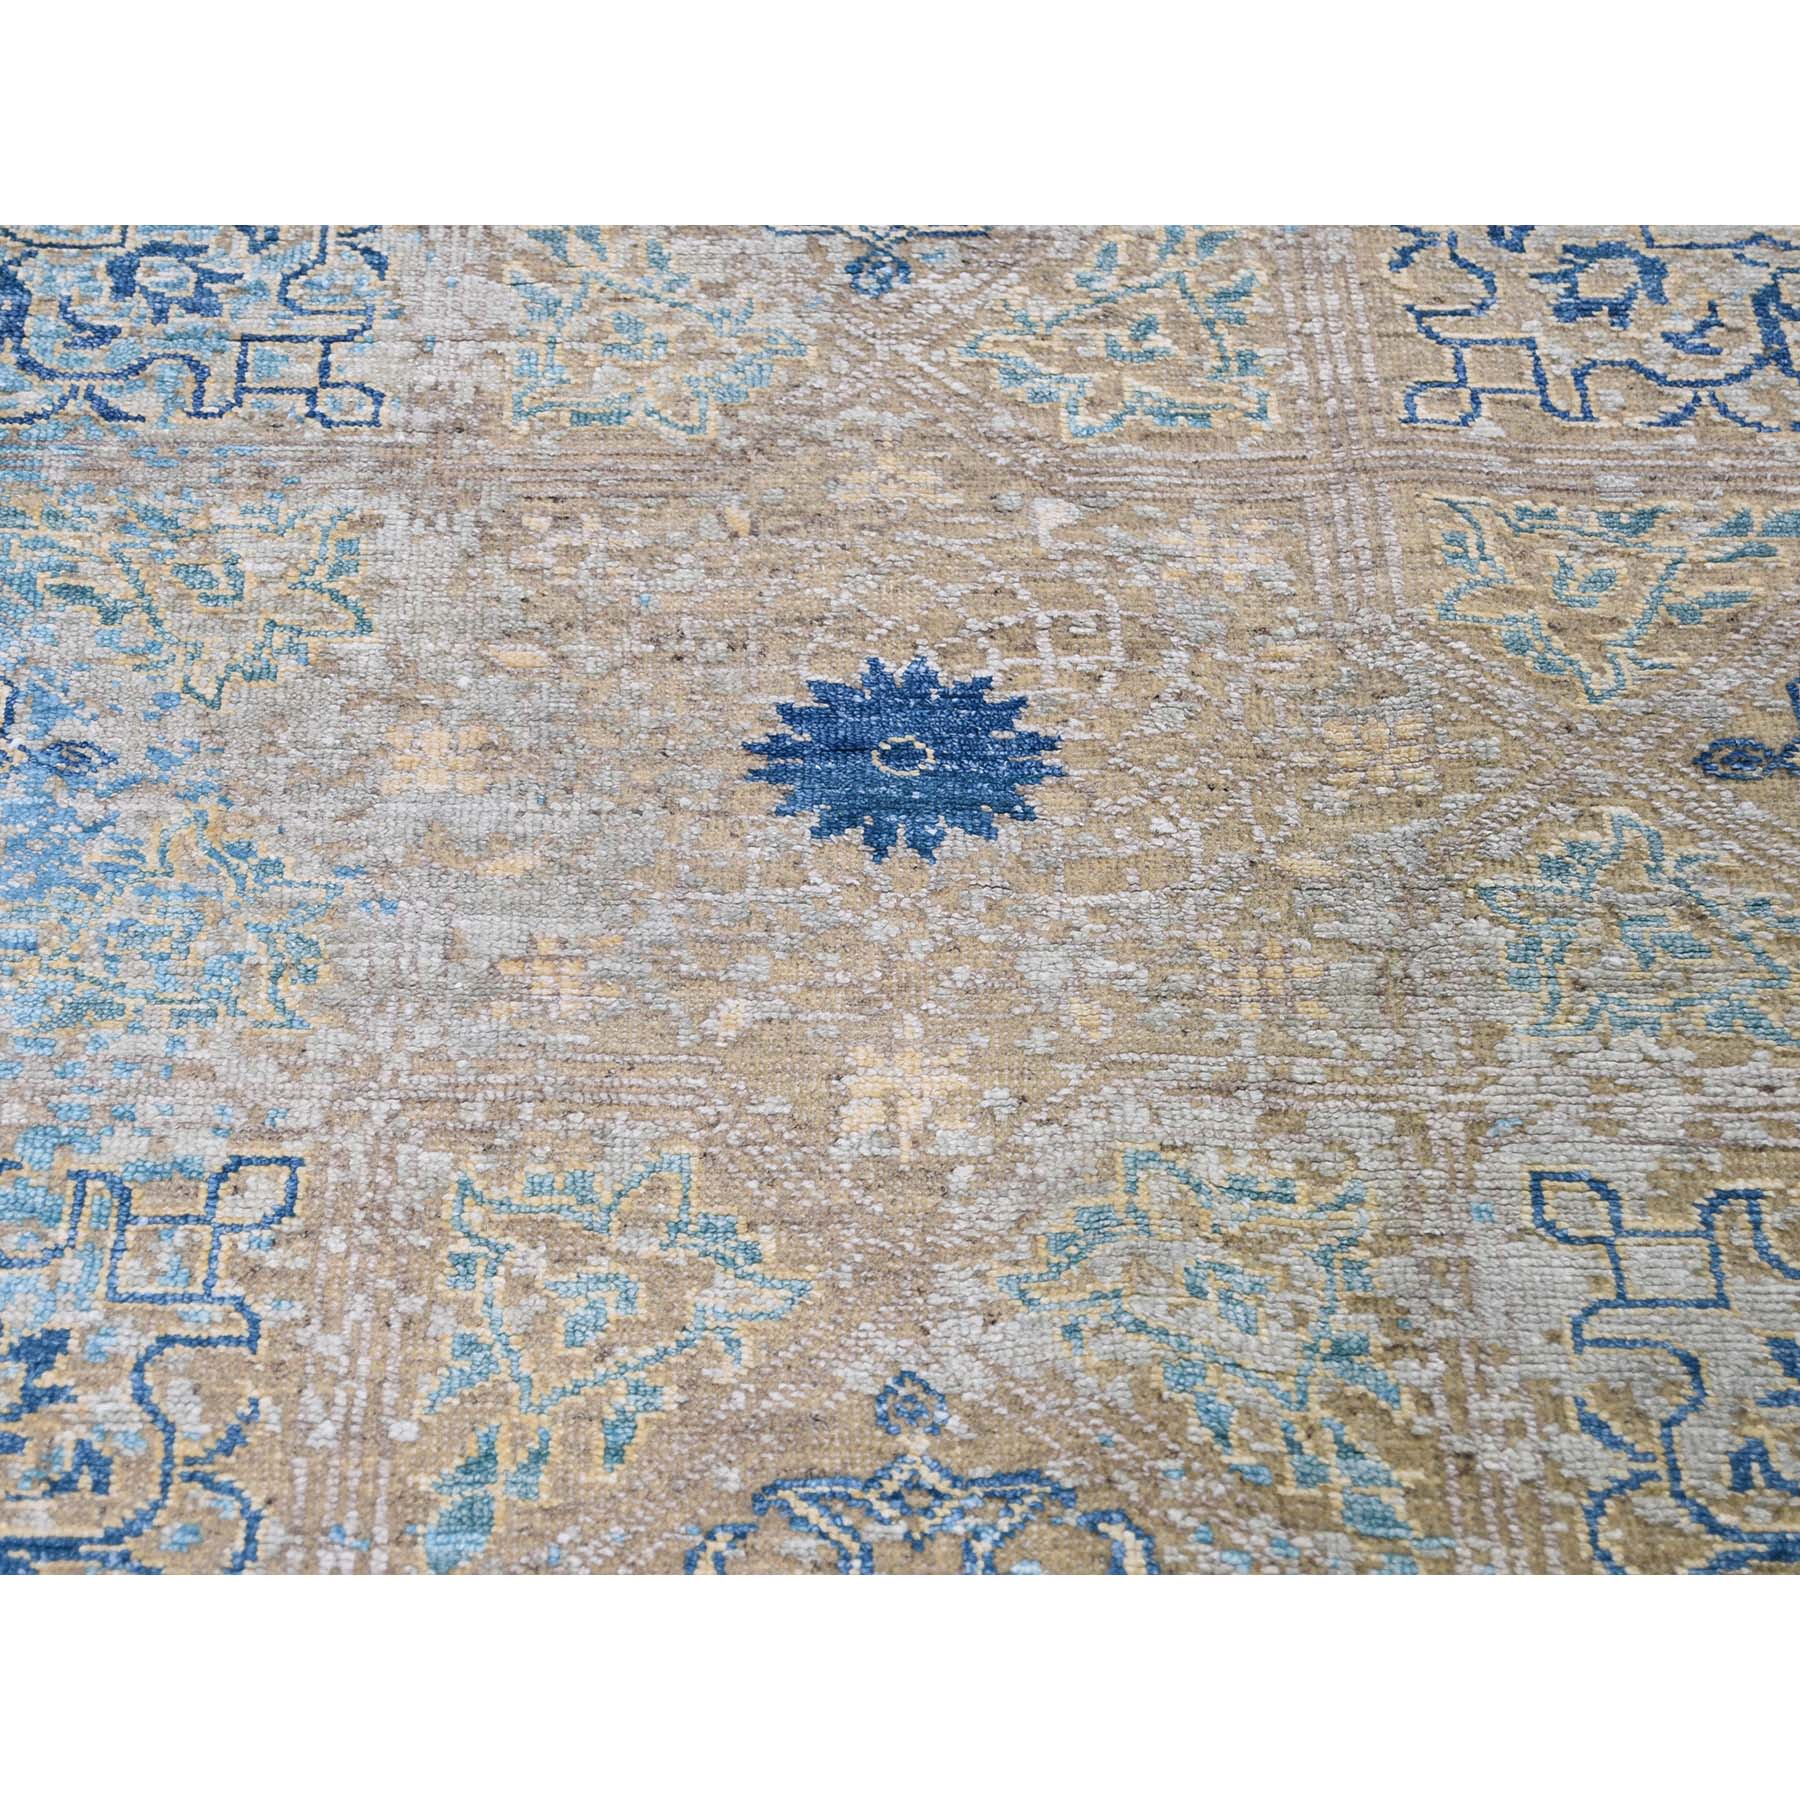 8-1 x9-9  Wool And Silk Textured Hi-Low Pile Ottoman Influence Hand-Knotted Modern Oriental Rug 